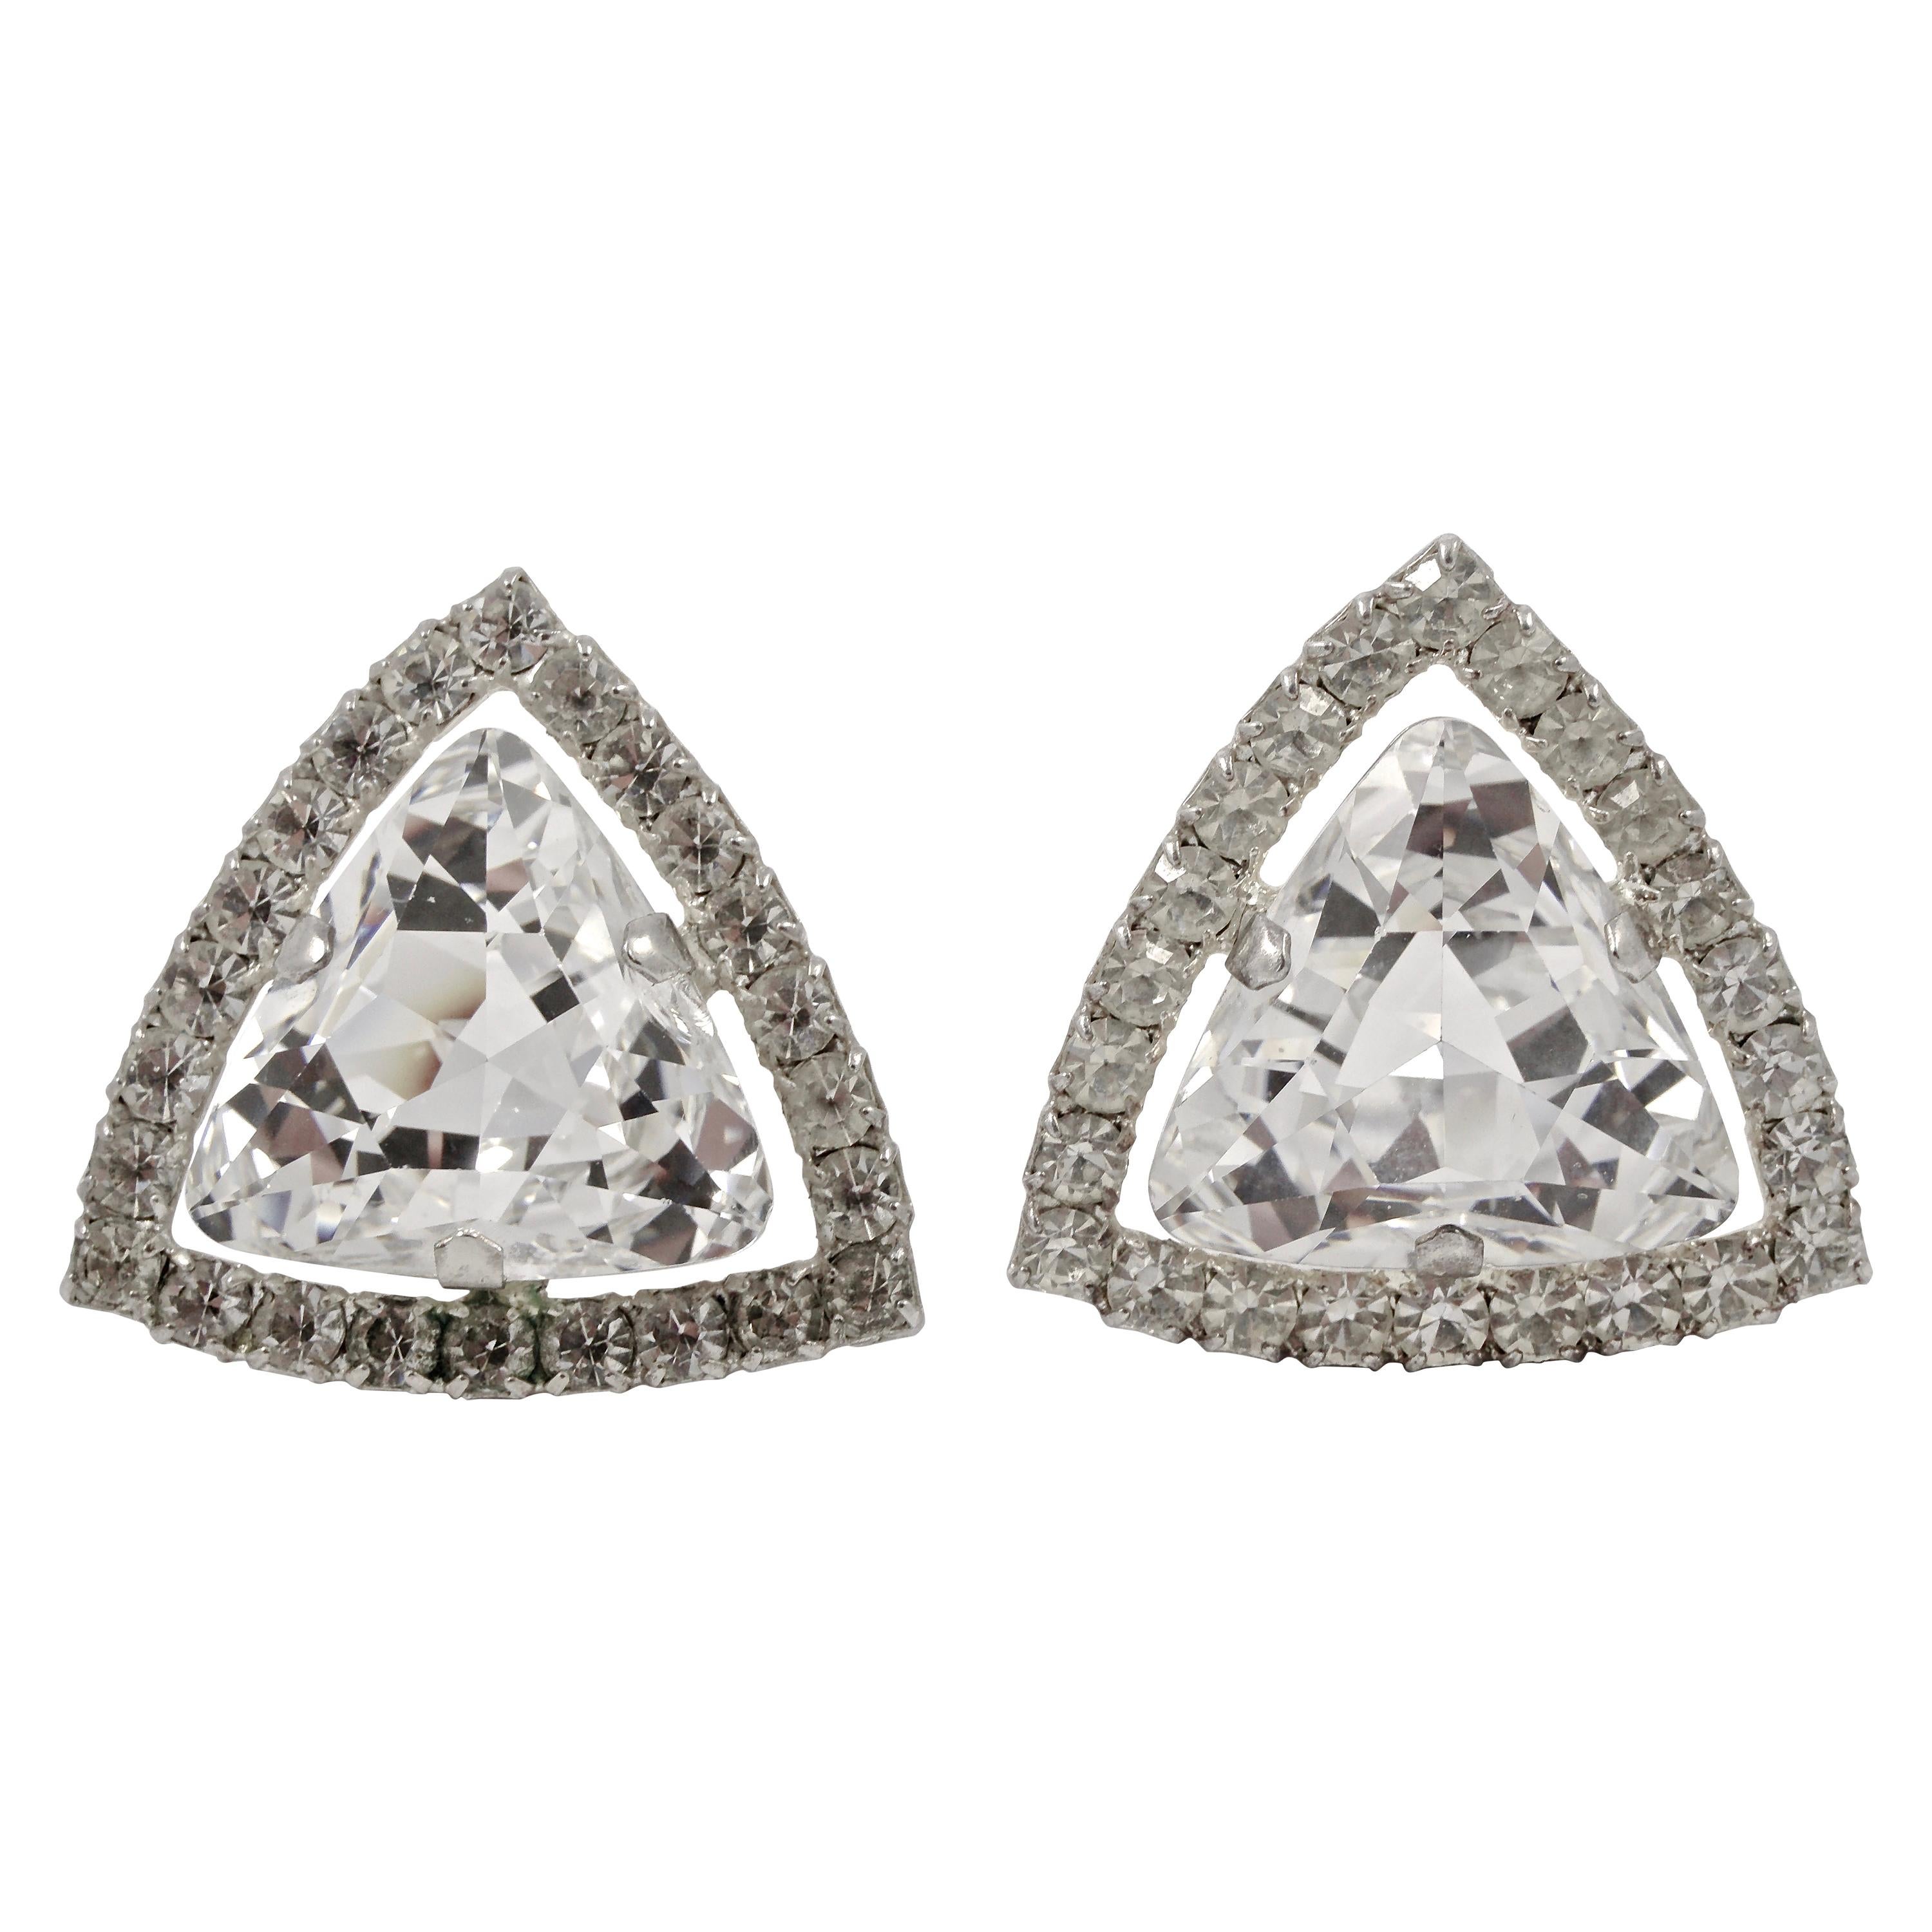 Large Silver Tone and Clear Rhinestone Clip On Statement Earrings circa 1960s For Sale